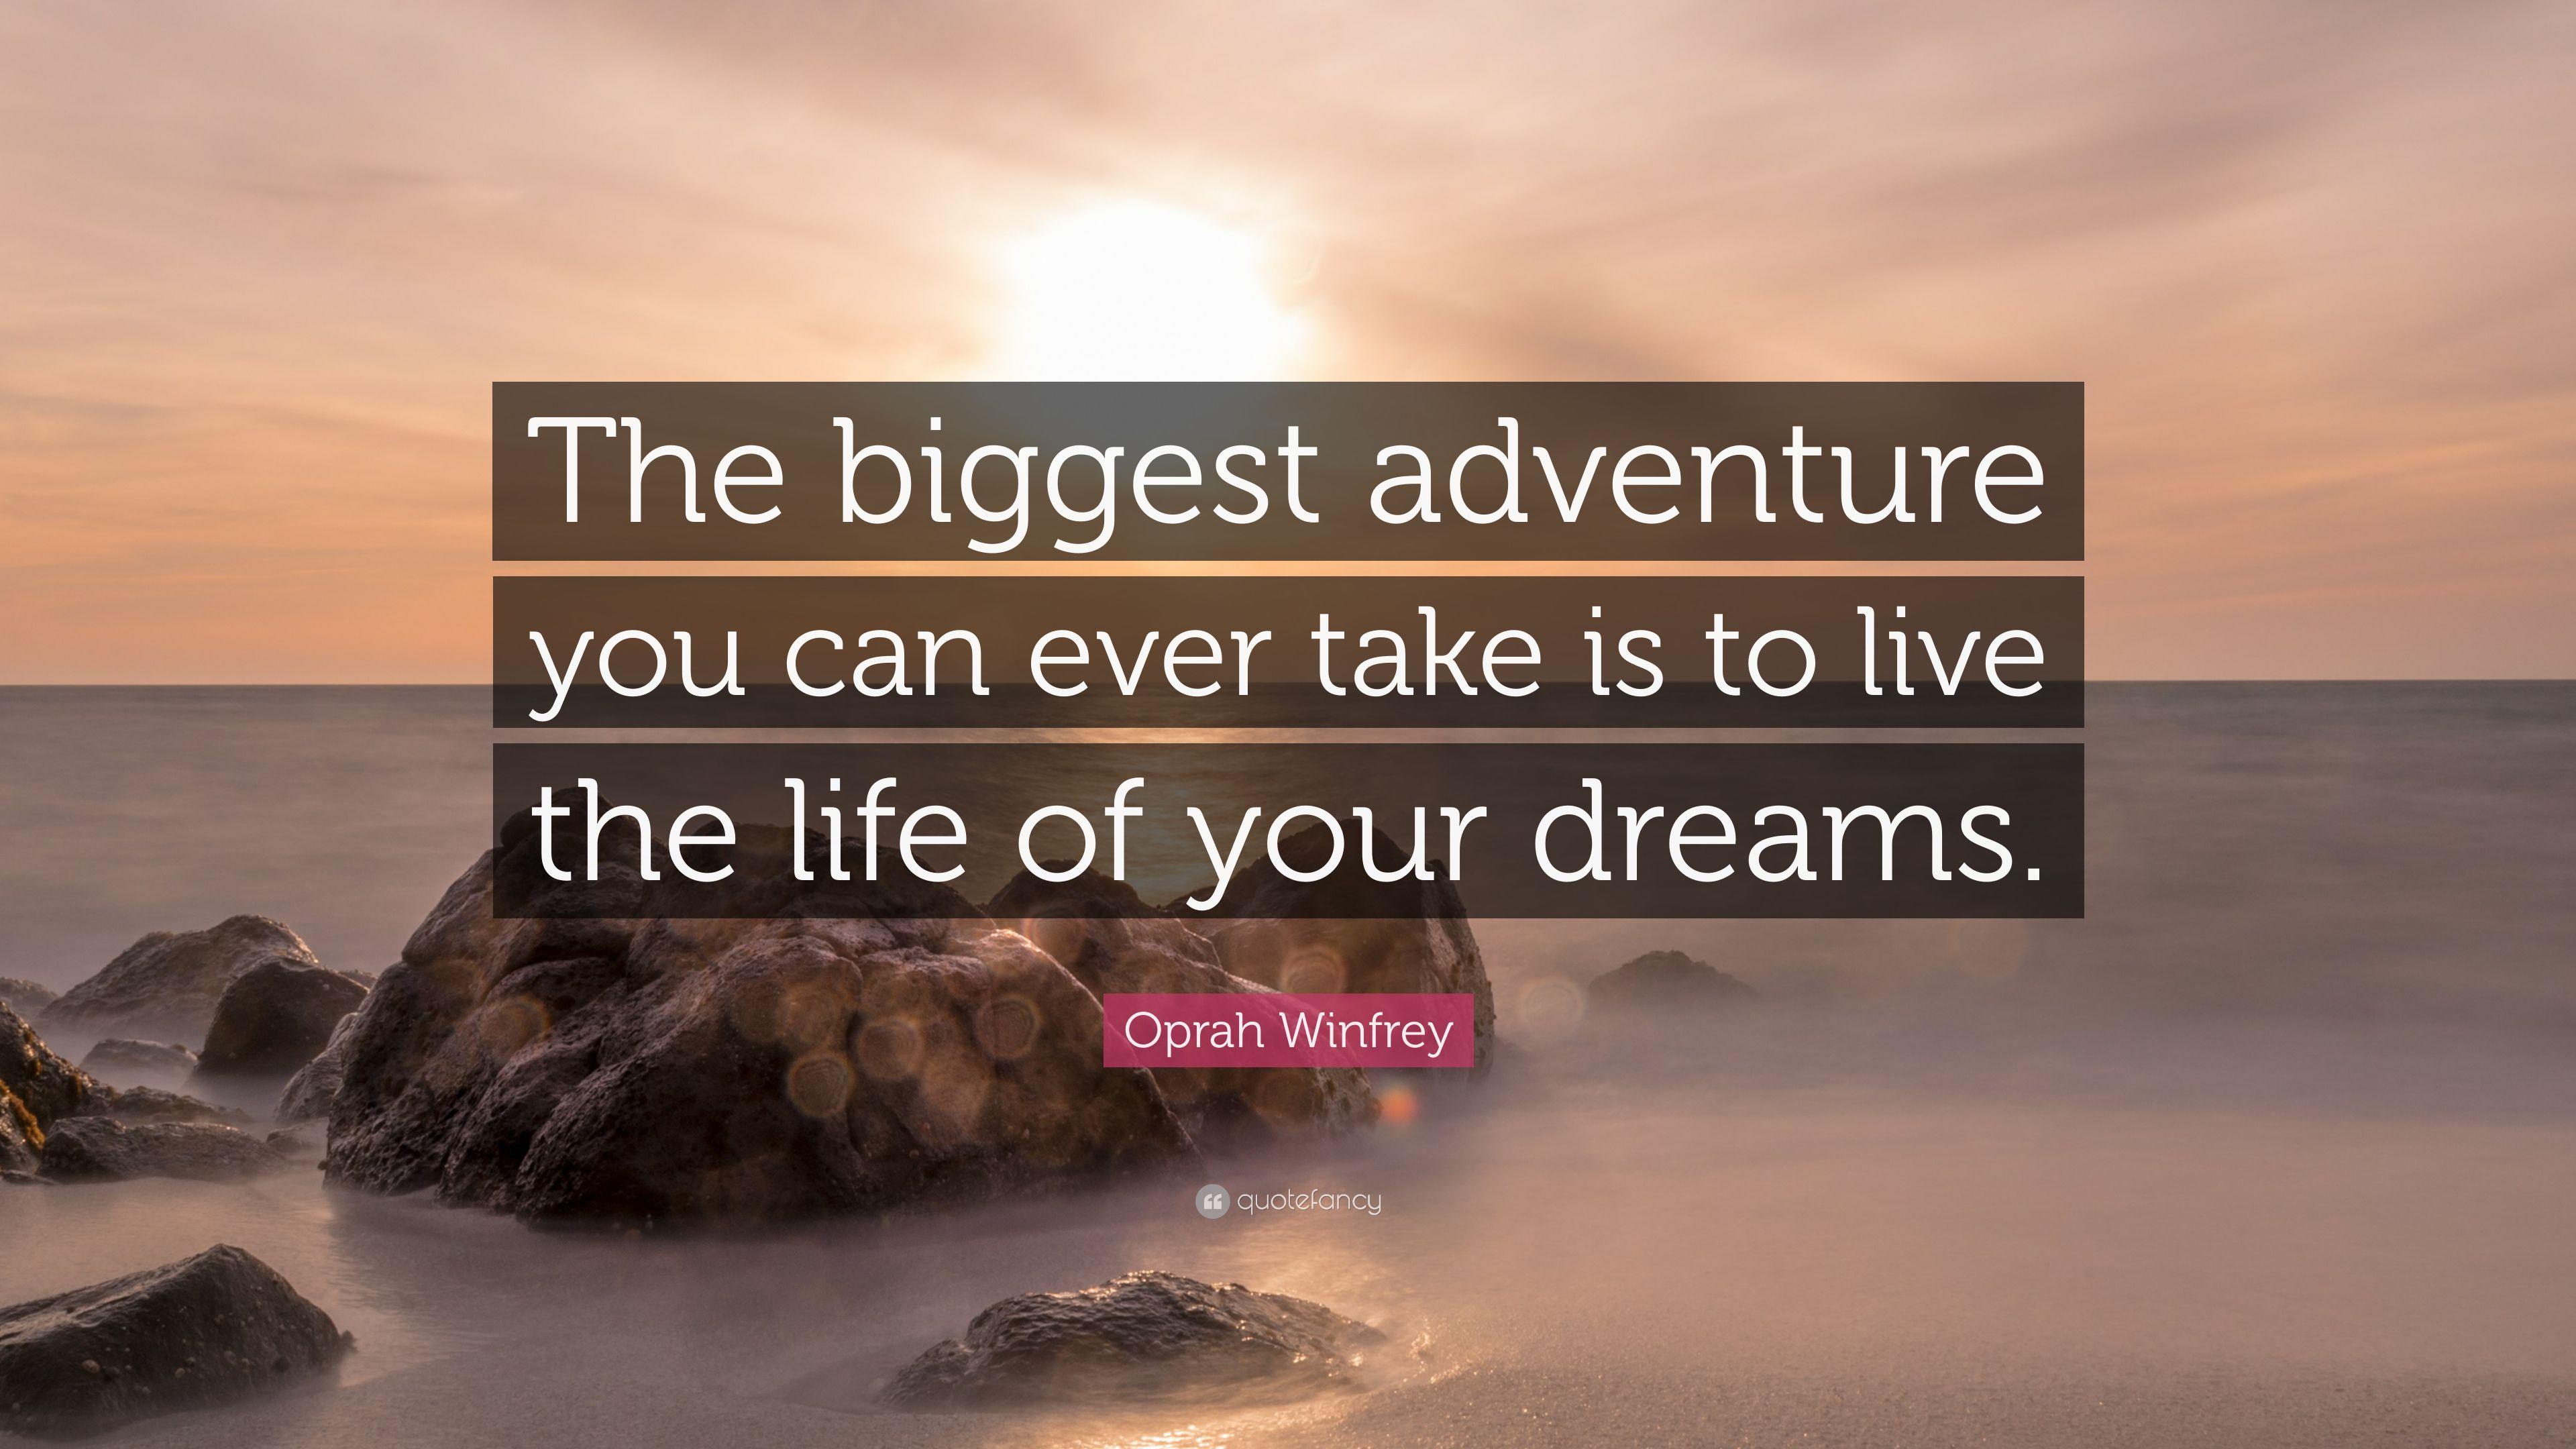 Oprah Winfrey Quote: "The biggest adventure you can ever take is to 